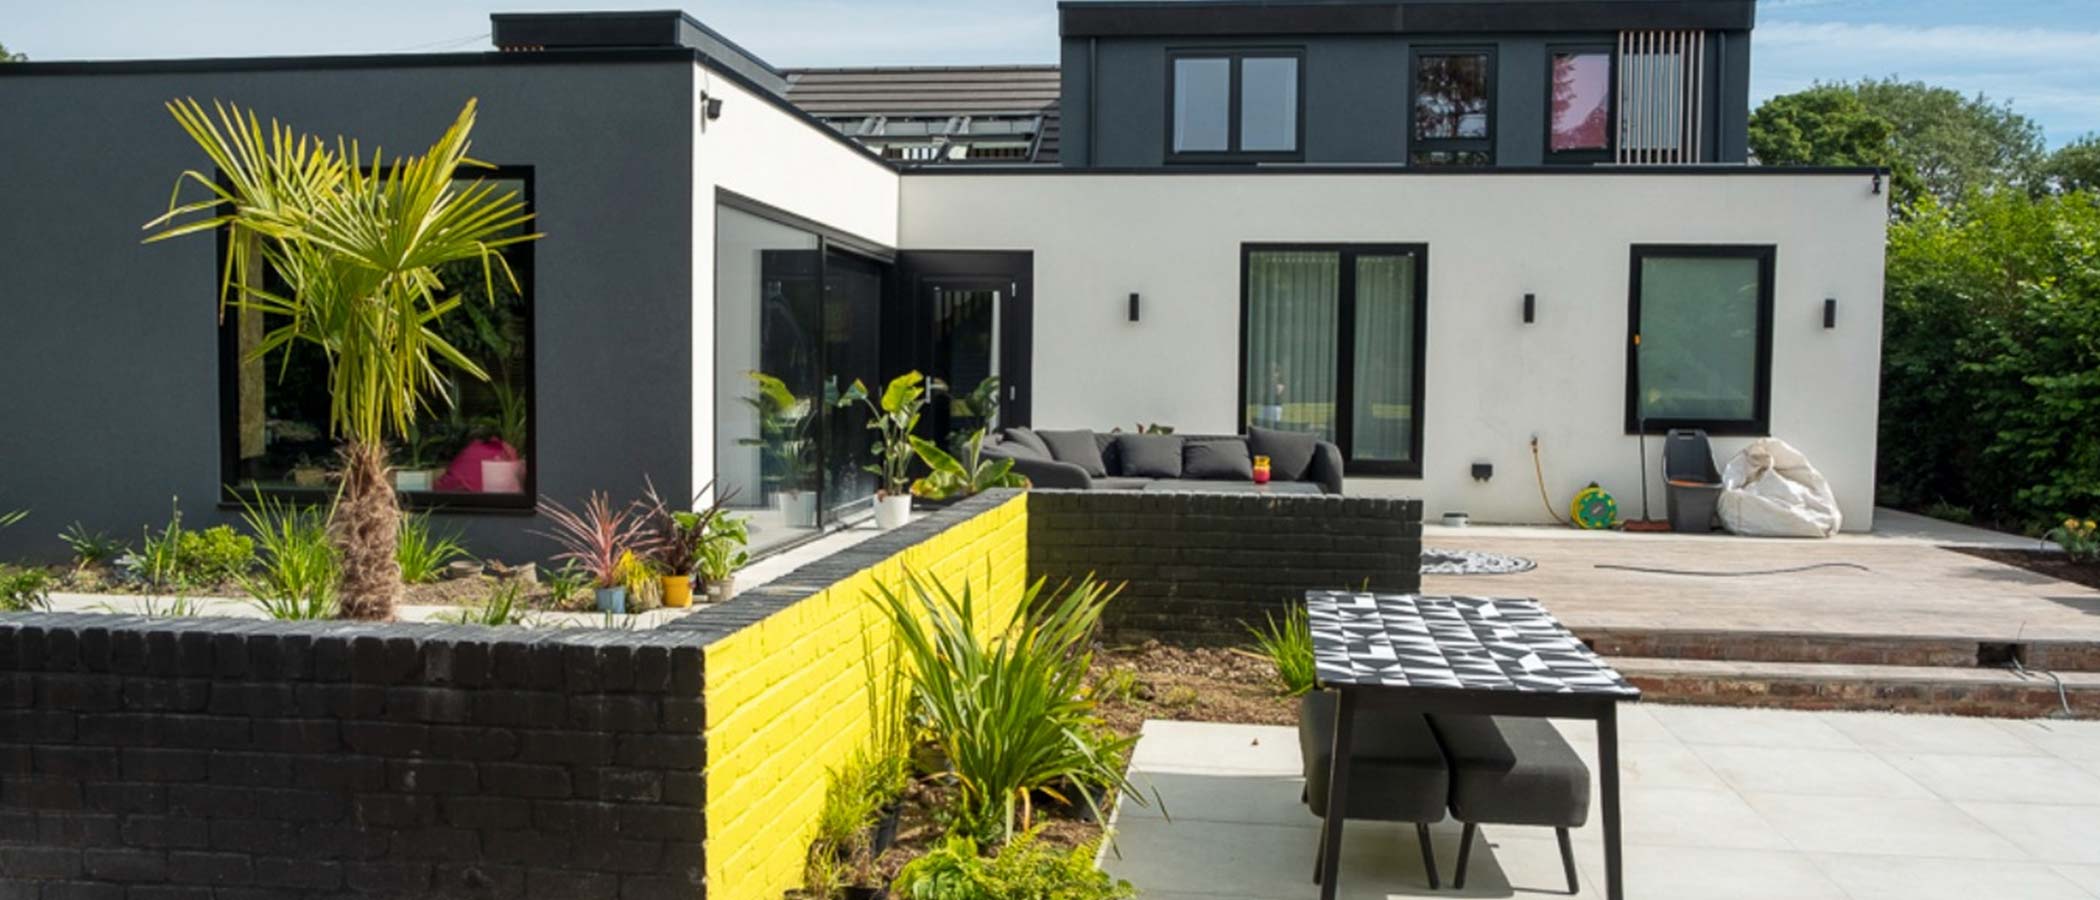 Case Study: A Contemporary House in Sheffield Featuring Internorm